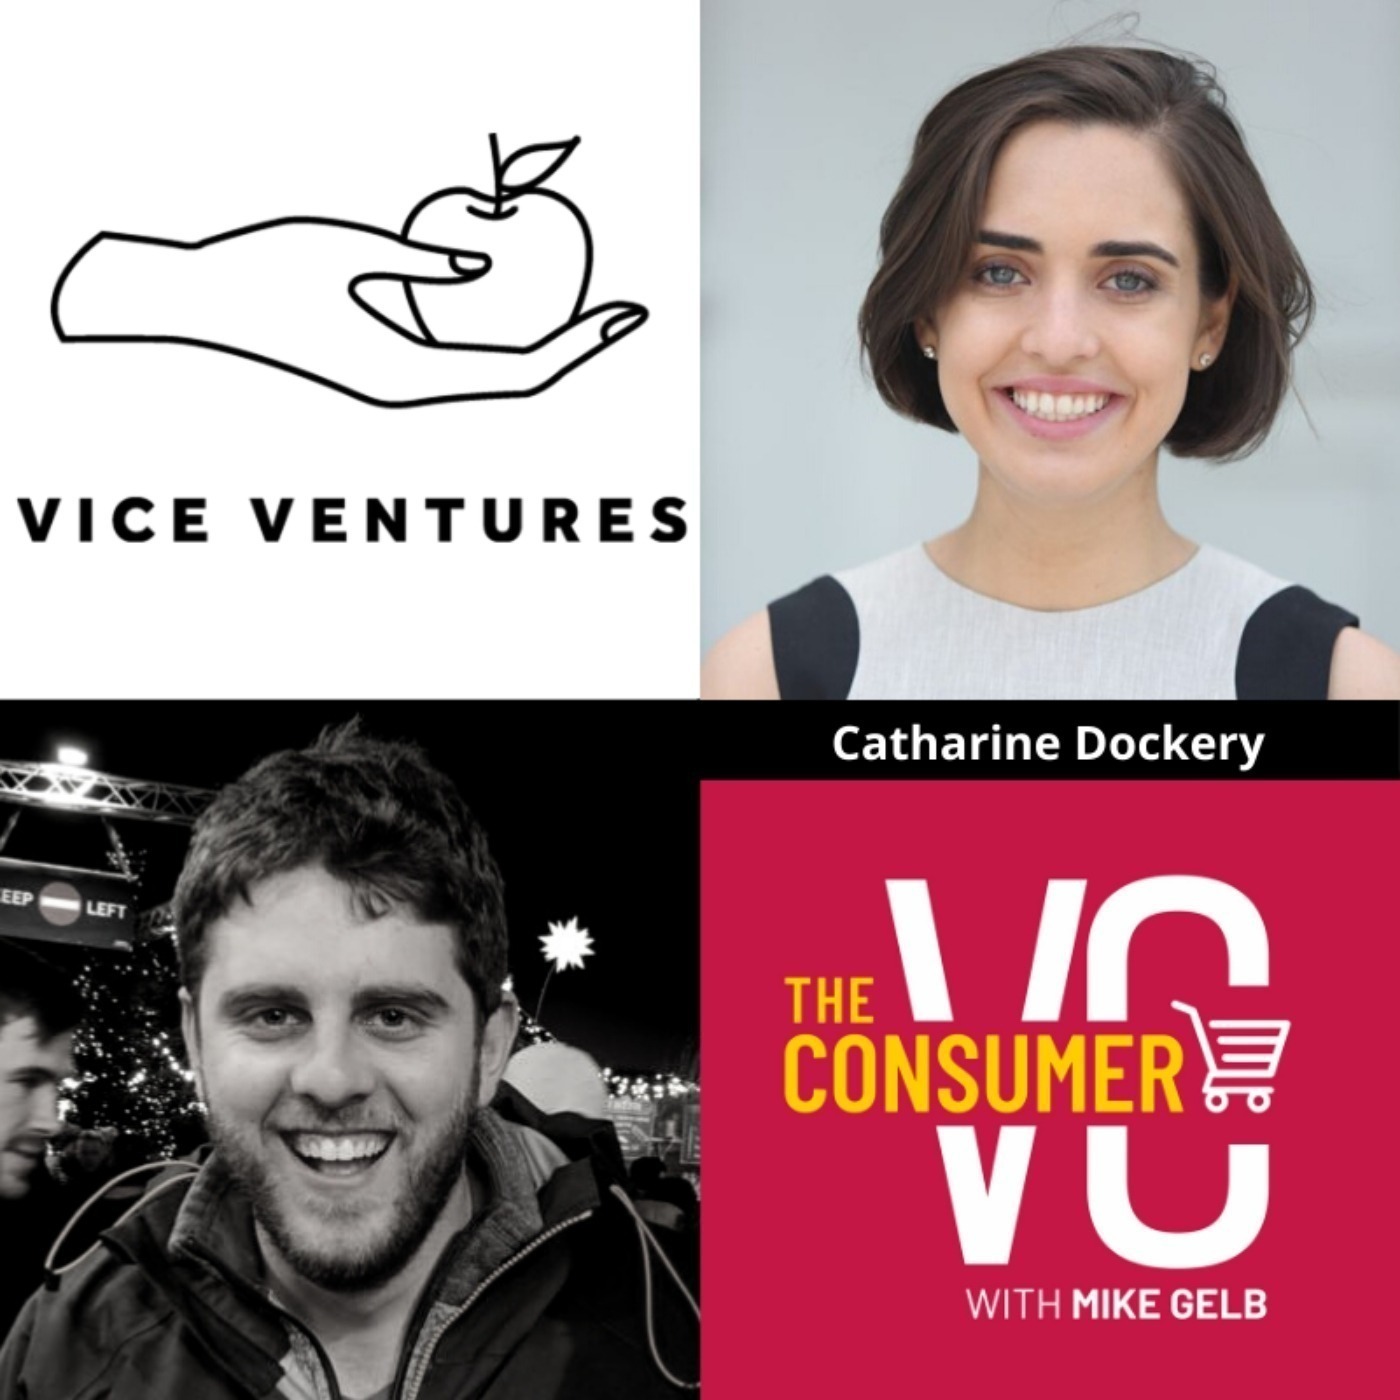 Catharine Dockery (Vice Ventures) - Cannabis, Alcohol, Nicotine, Gambling and Everything Vice